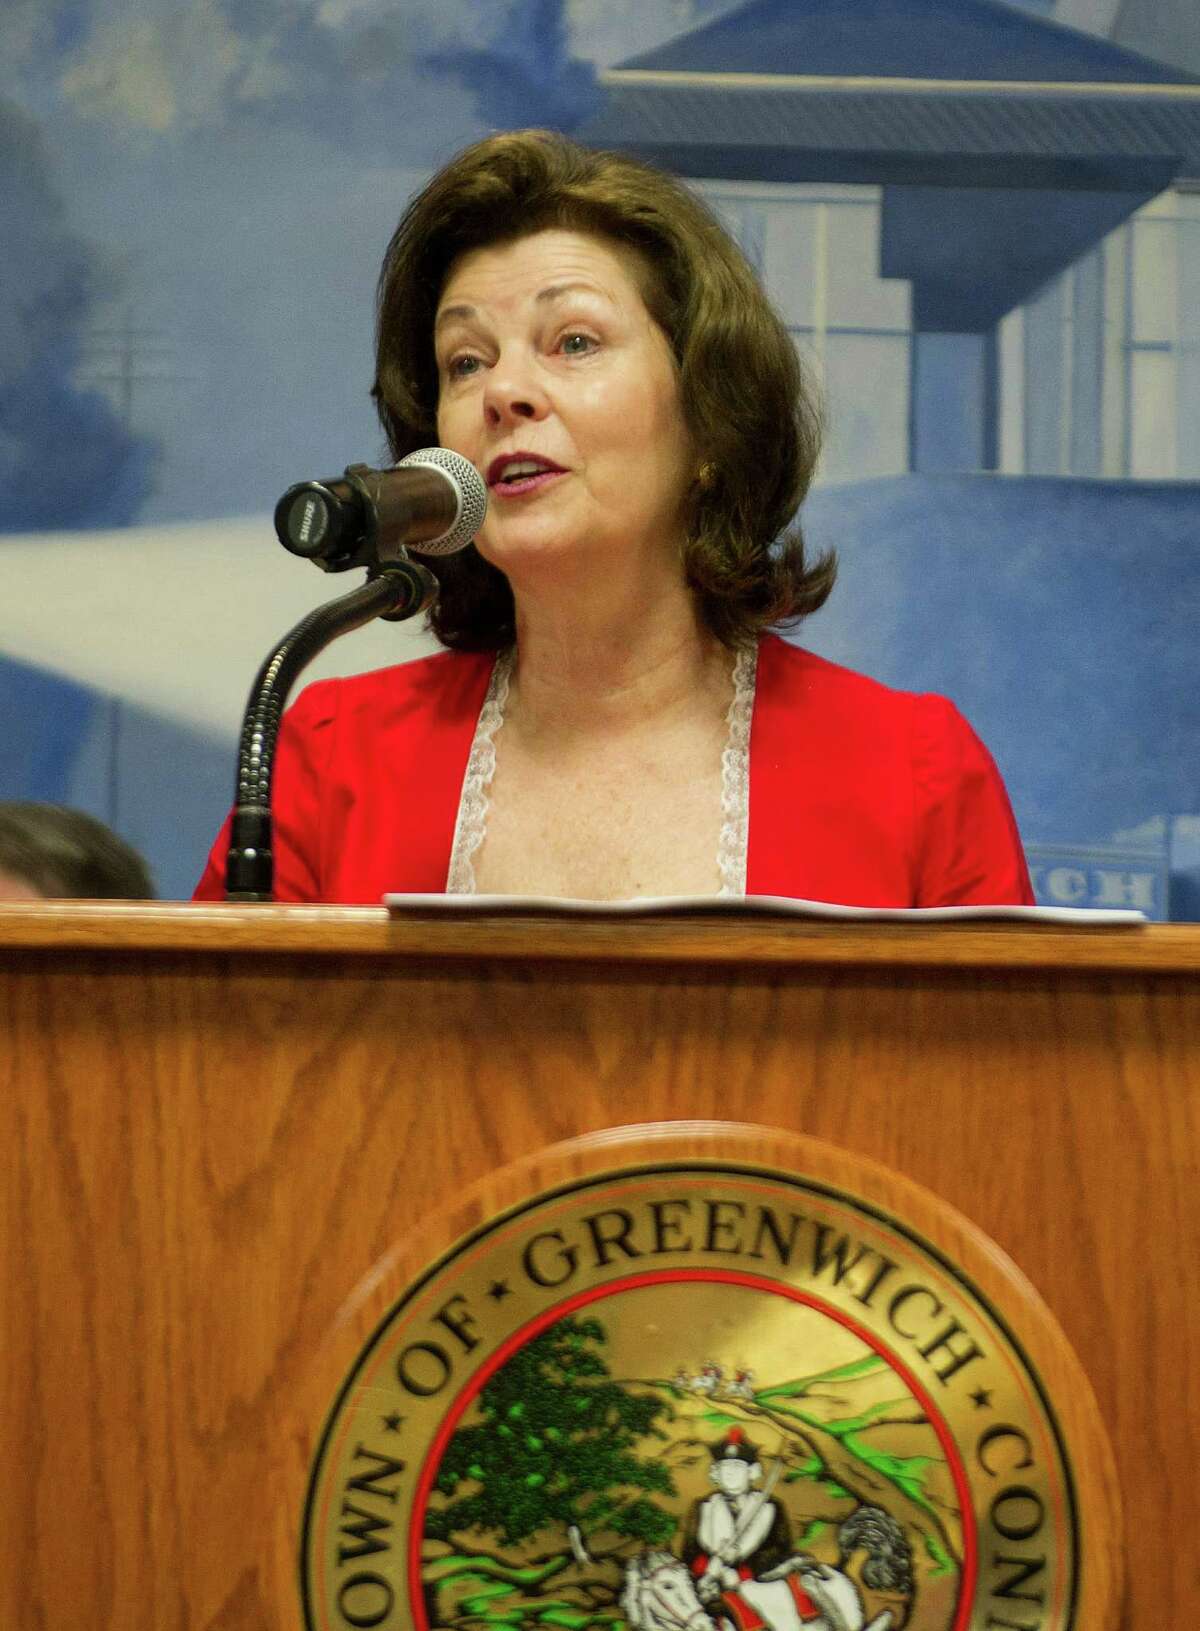 Bea Crumbine. co-chairman of the Independence Day Association, speaks during the Fourth of July ceremony at Greenwich Town Hall held by the Independence Day Association and the Town of Greenwich on Friday, July 4, 2014.